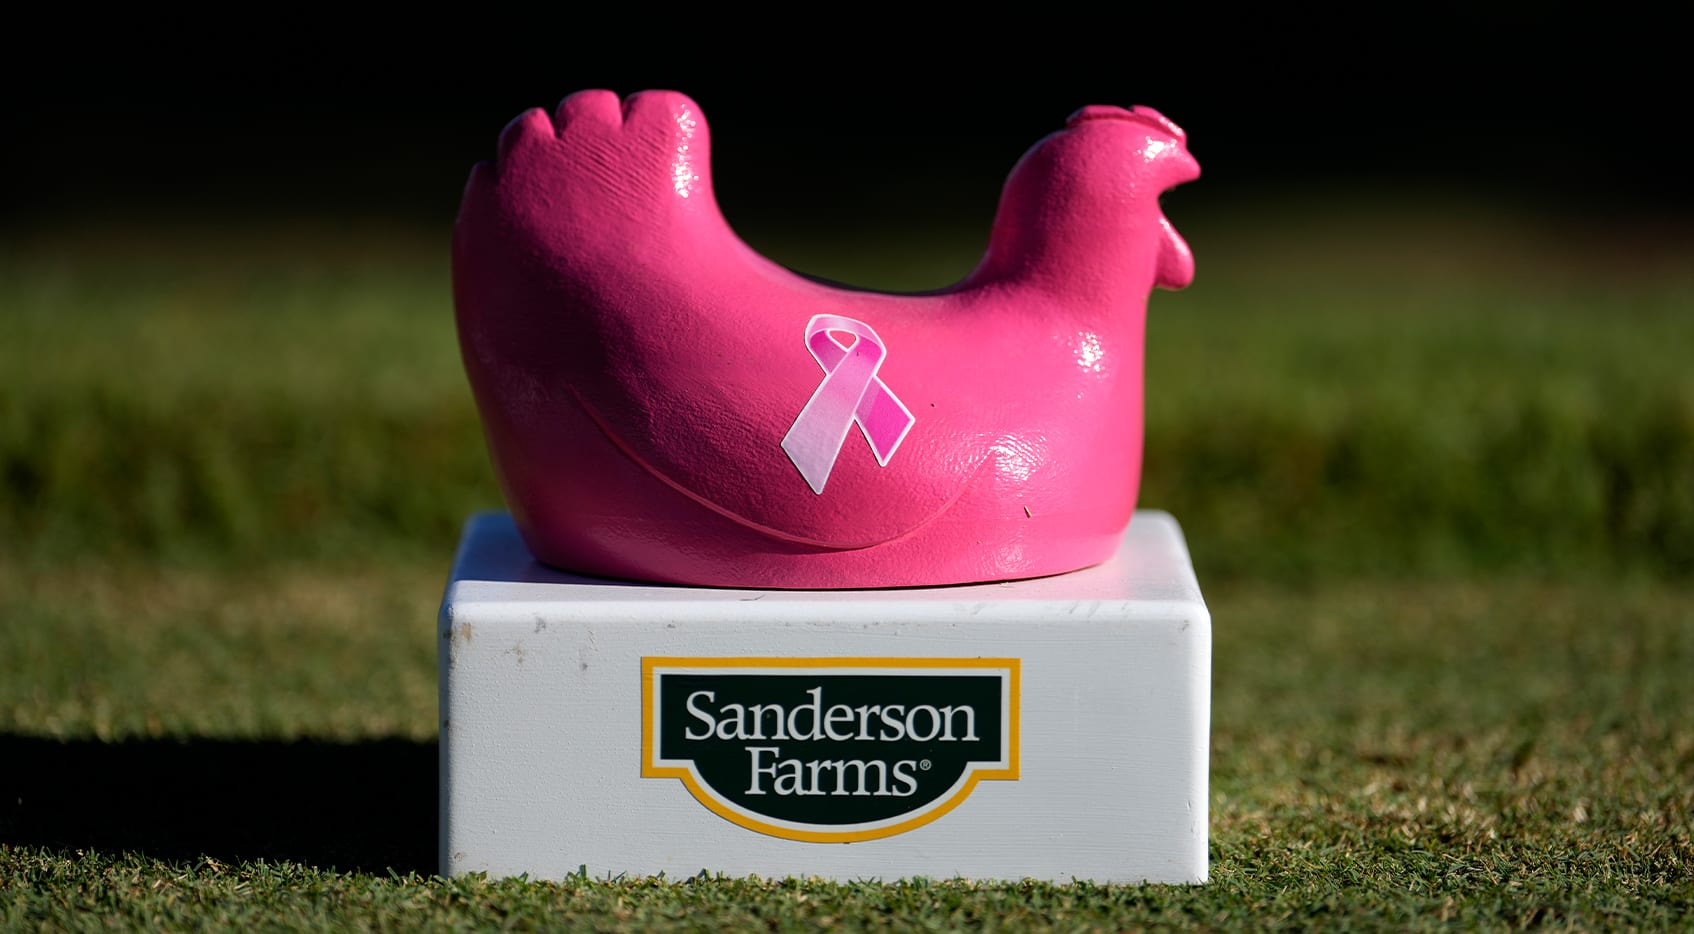 How to watch Sanderson Farms Championship, Round 4 Featured Groups